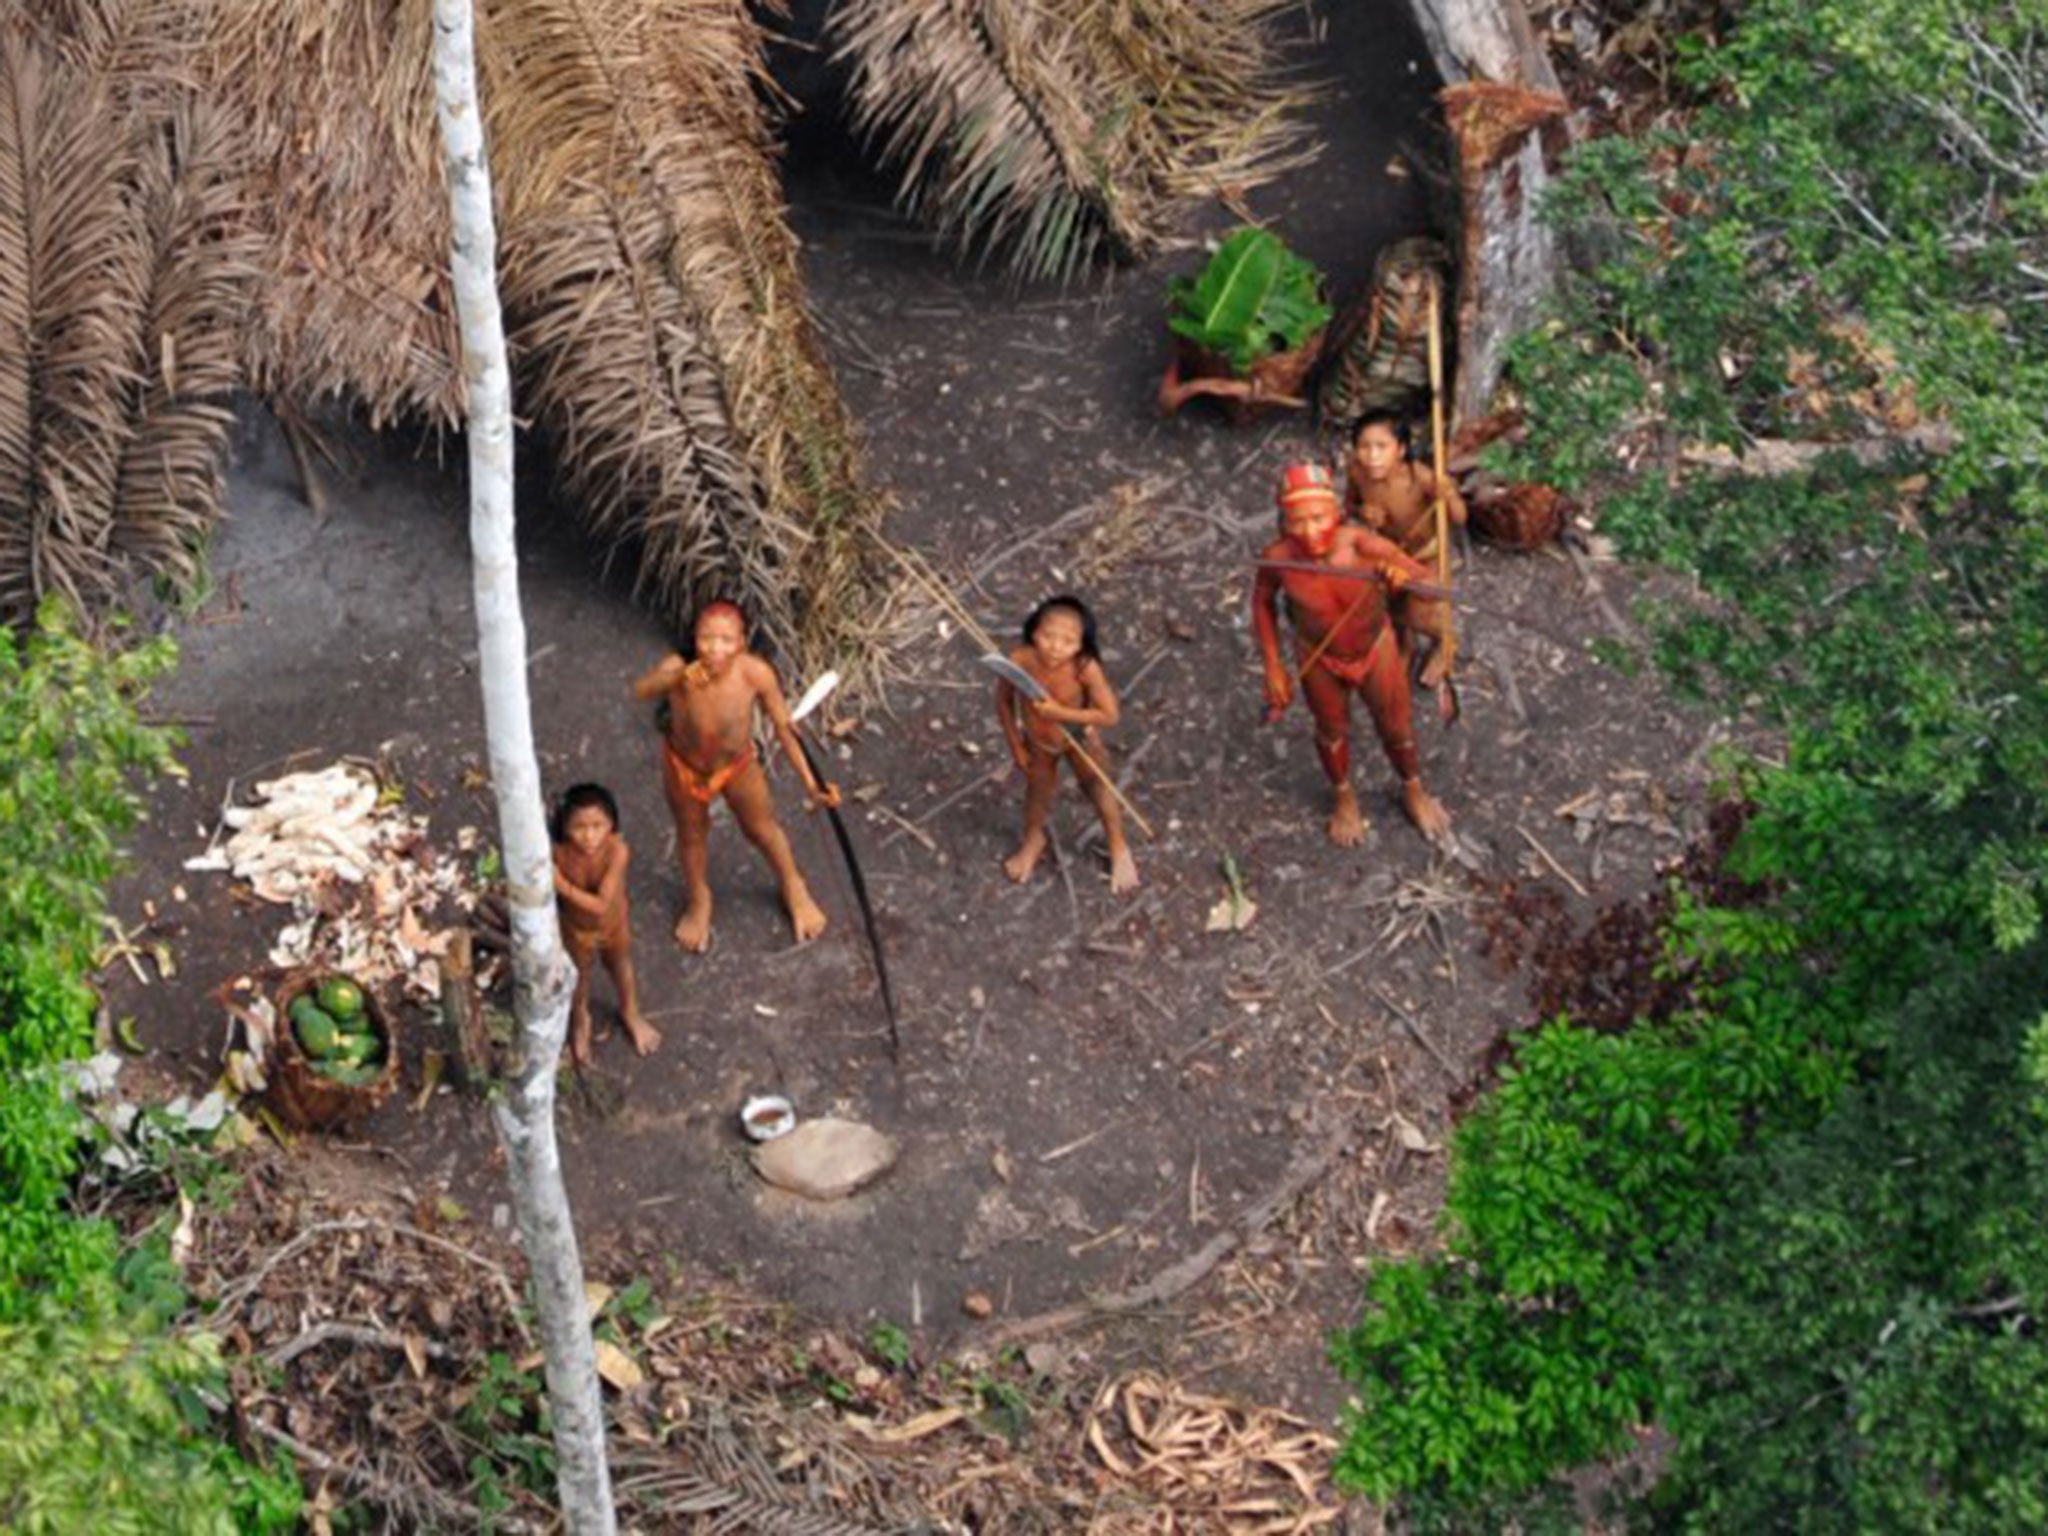 At home: Amazon tribespeople are being contaminated by drugs and disease